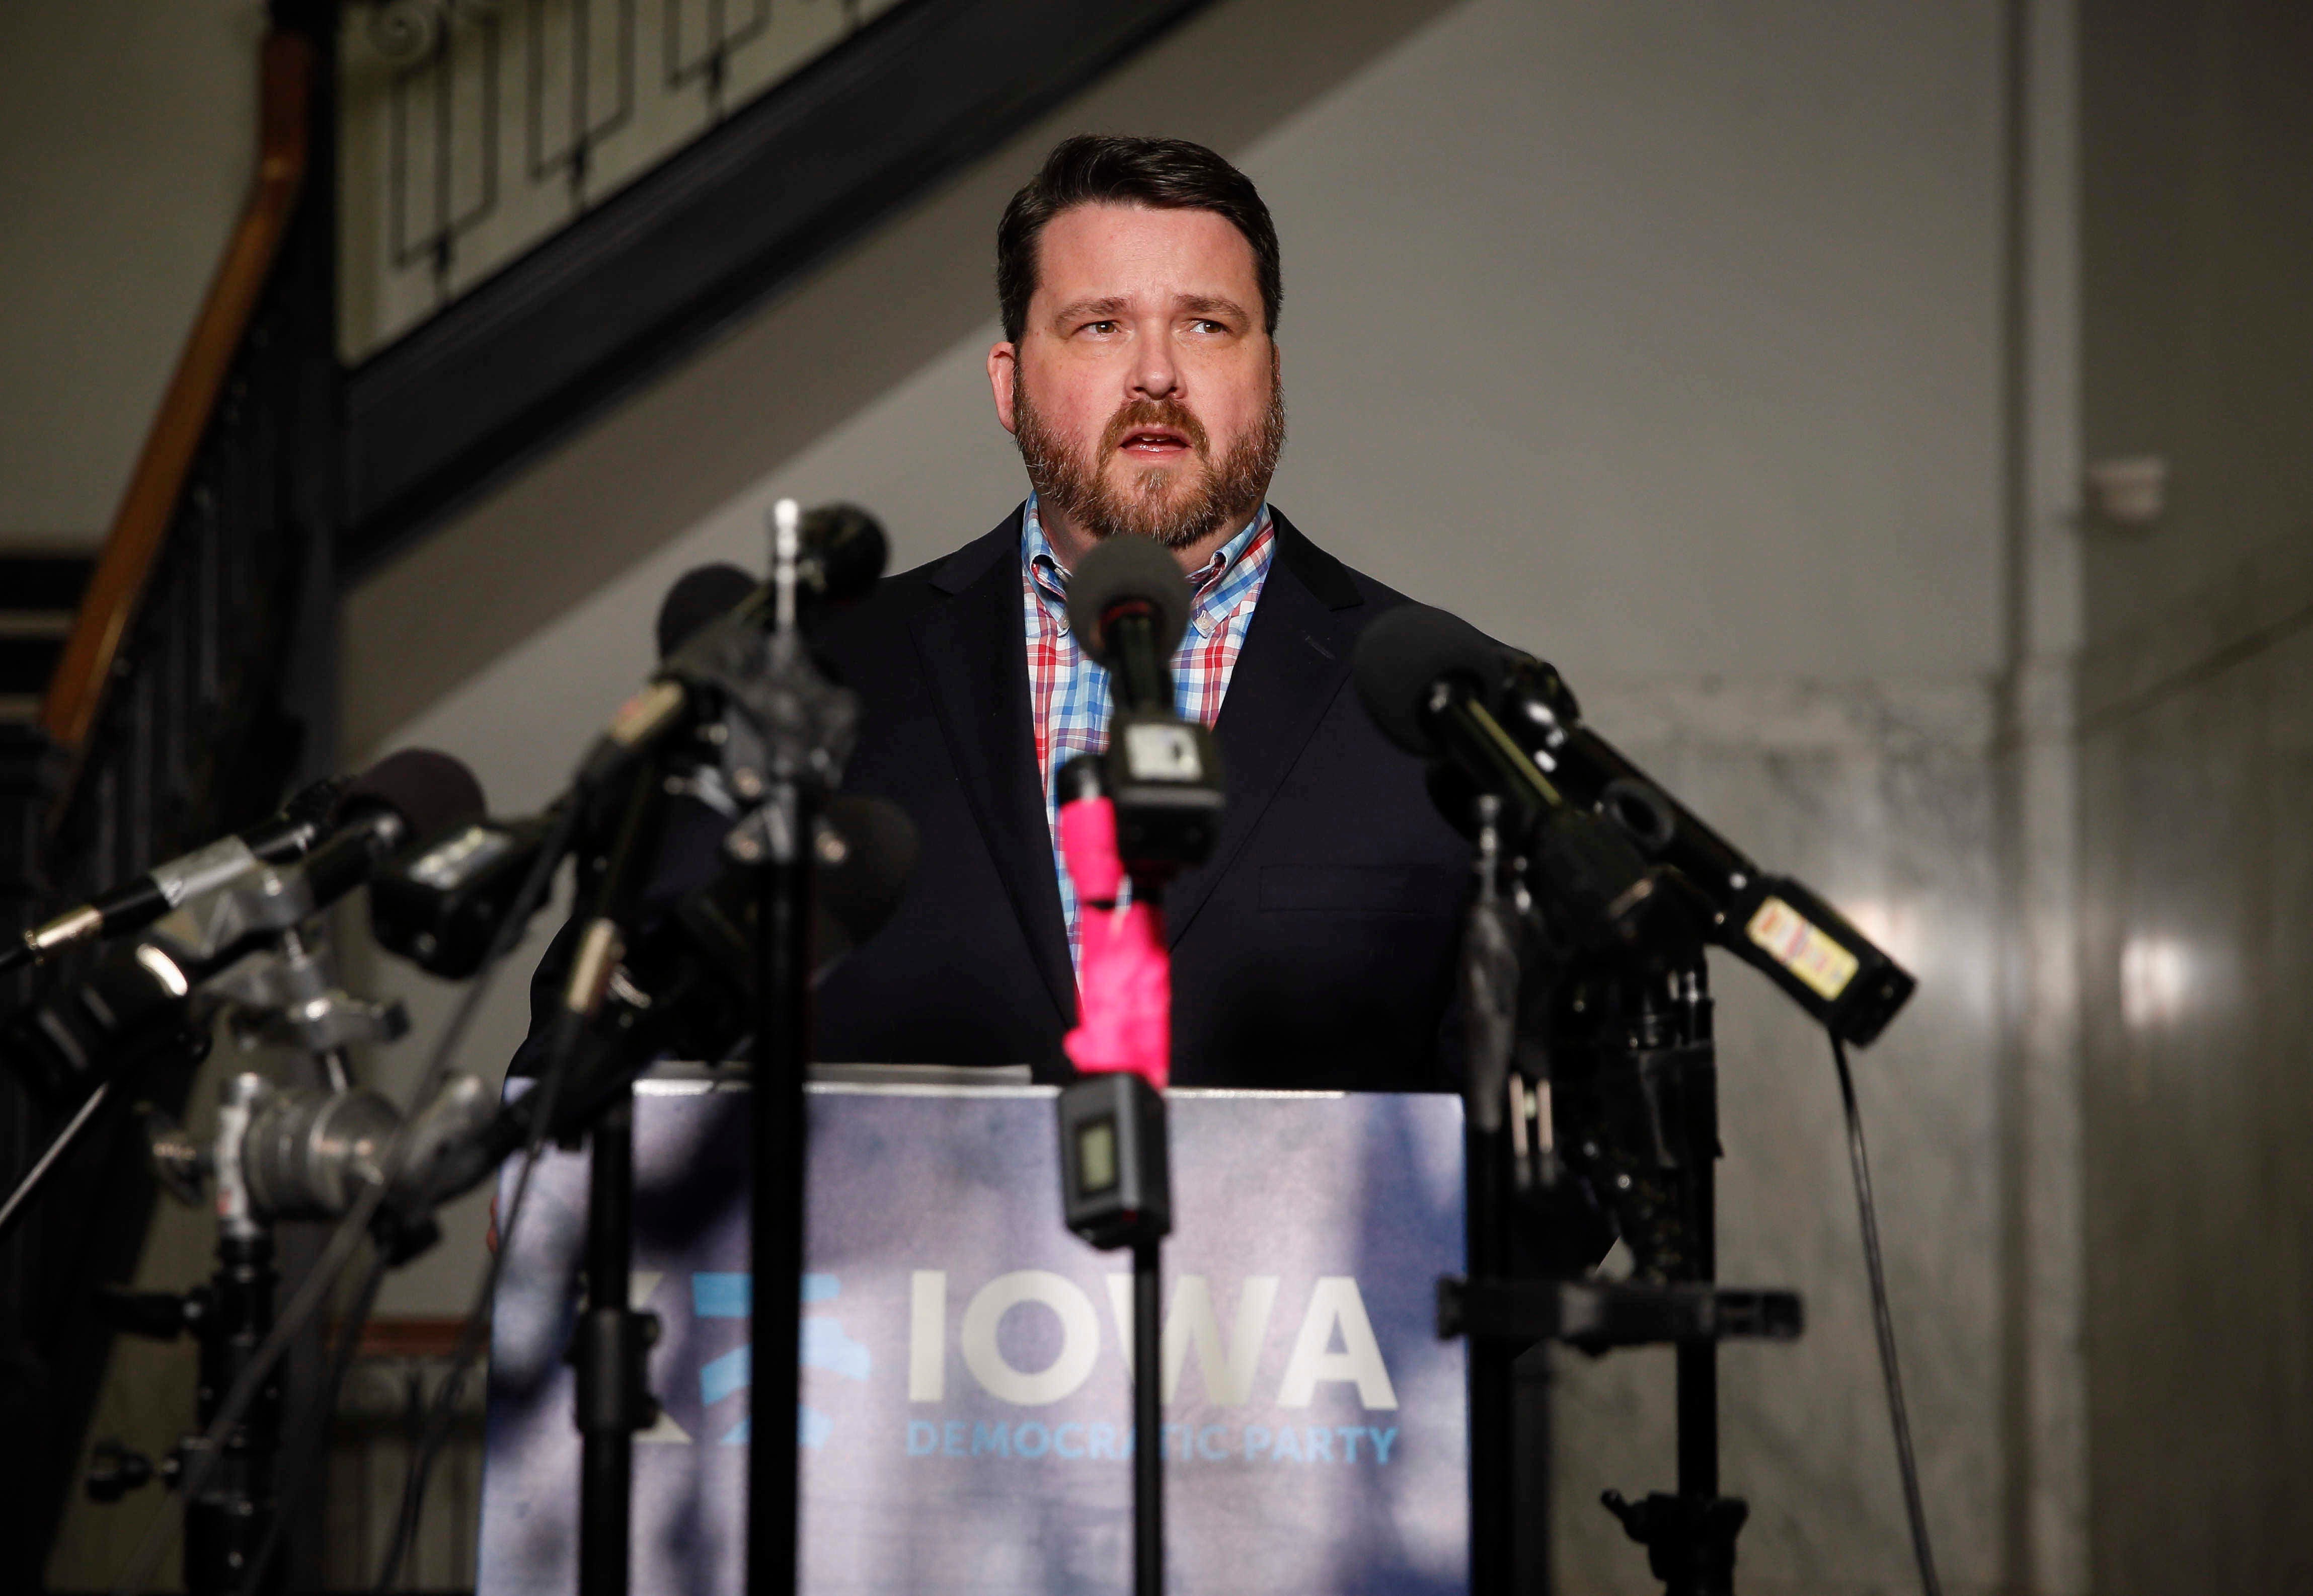 Iowa Democratic Party Chairman Troy Price speaks to members of the media during a press conference, Friday, Feb. 7, 2020  in Des Moines, Iowa.